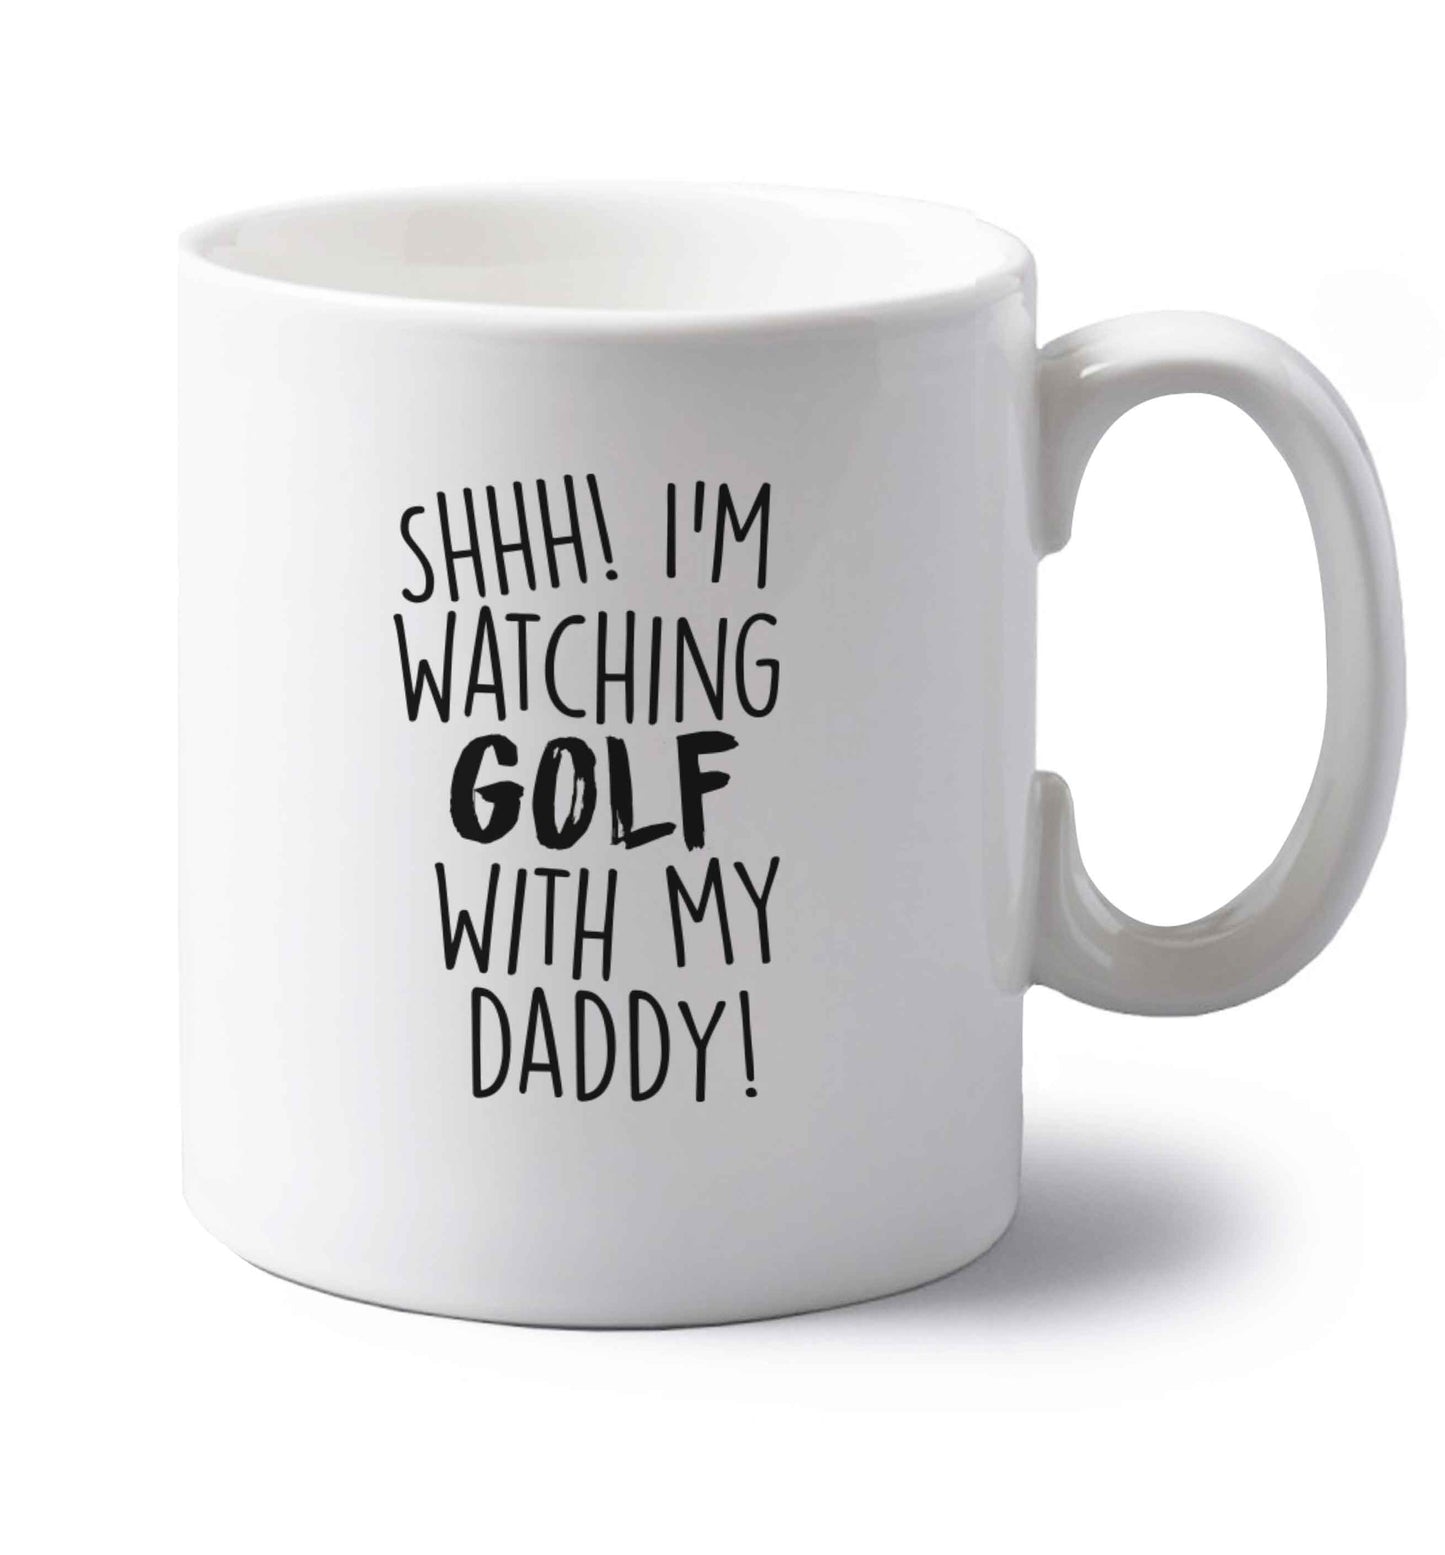 Shh I'm watching golf with my daddy left handed white ceramic mug 